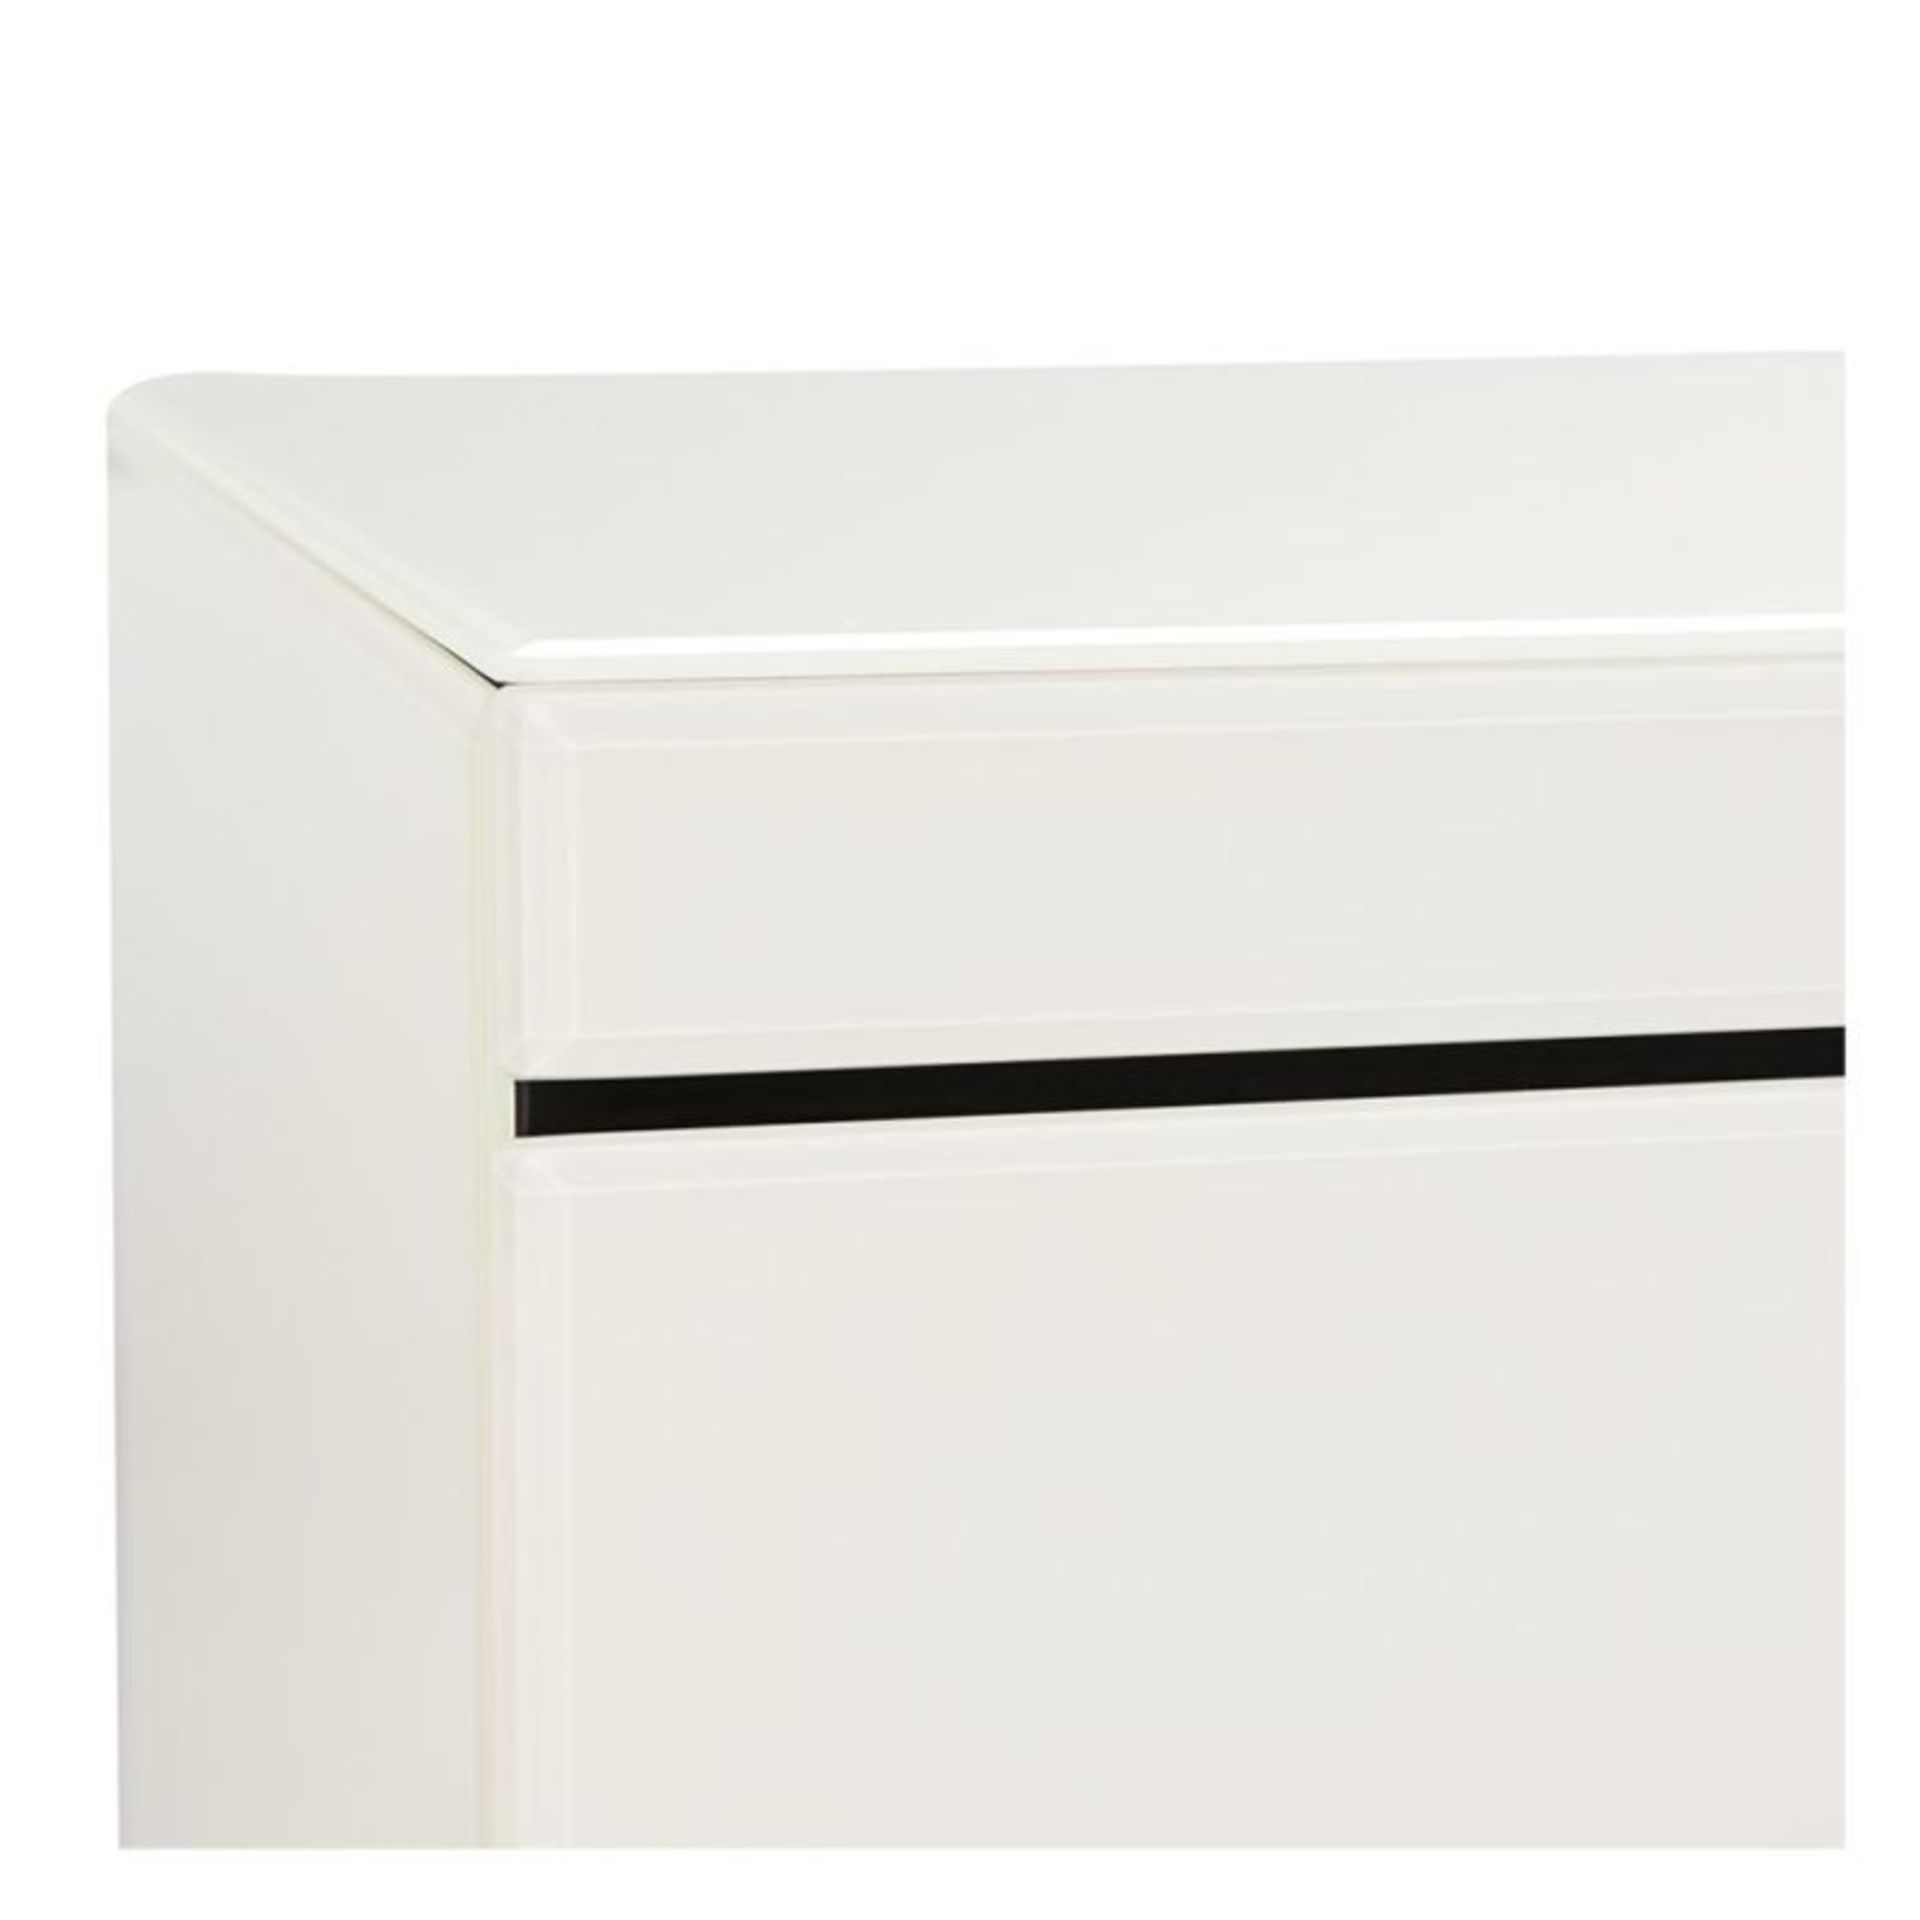 Brand new direct from the manufacturers the shard glass diamond pearl cream 3 + 3 drawer chest, made - Bild 2 aus 2